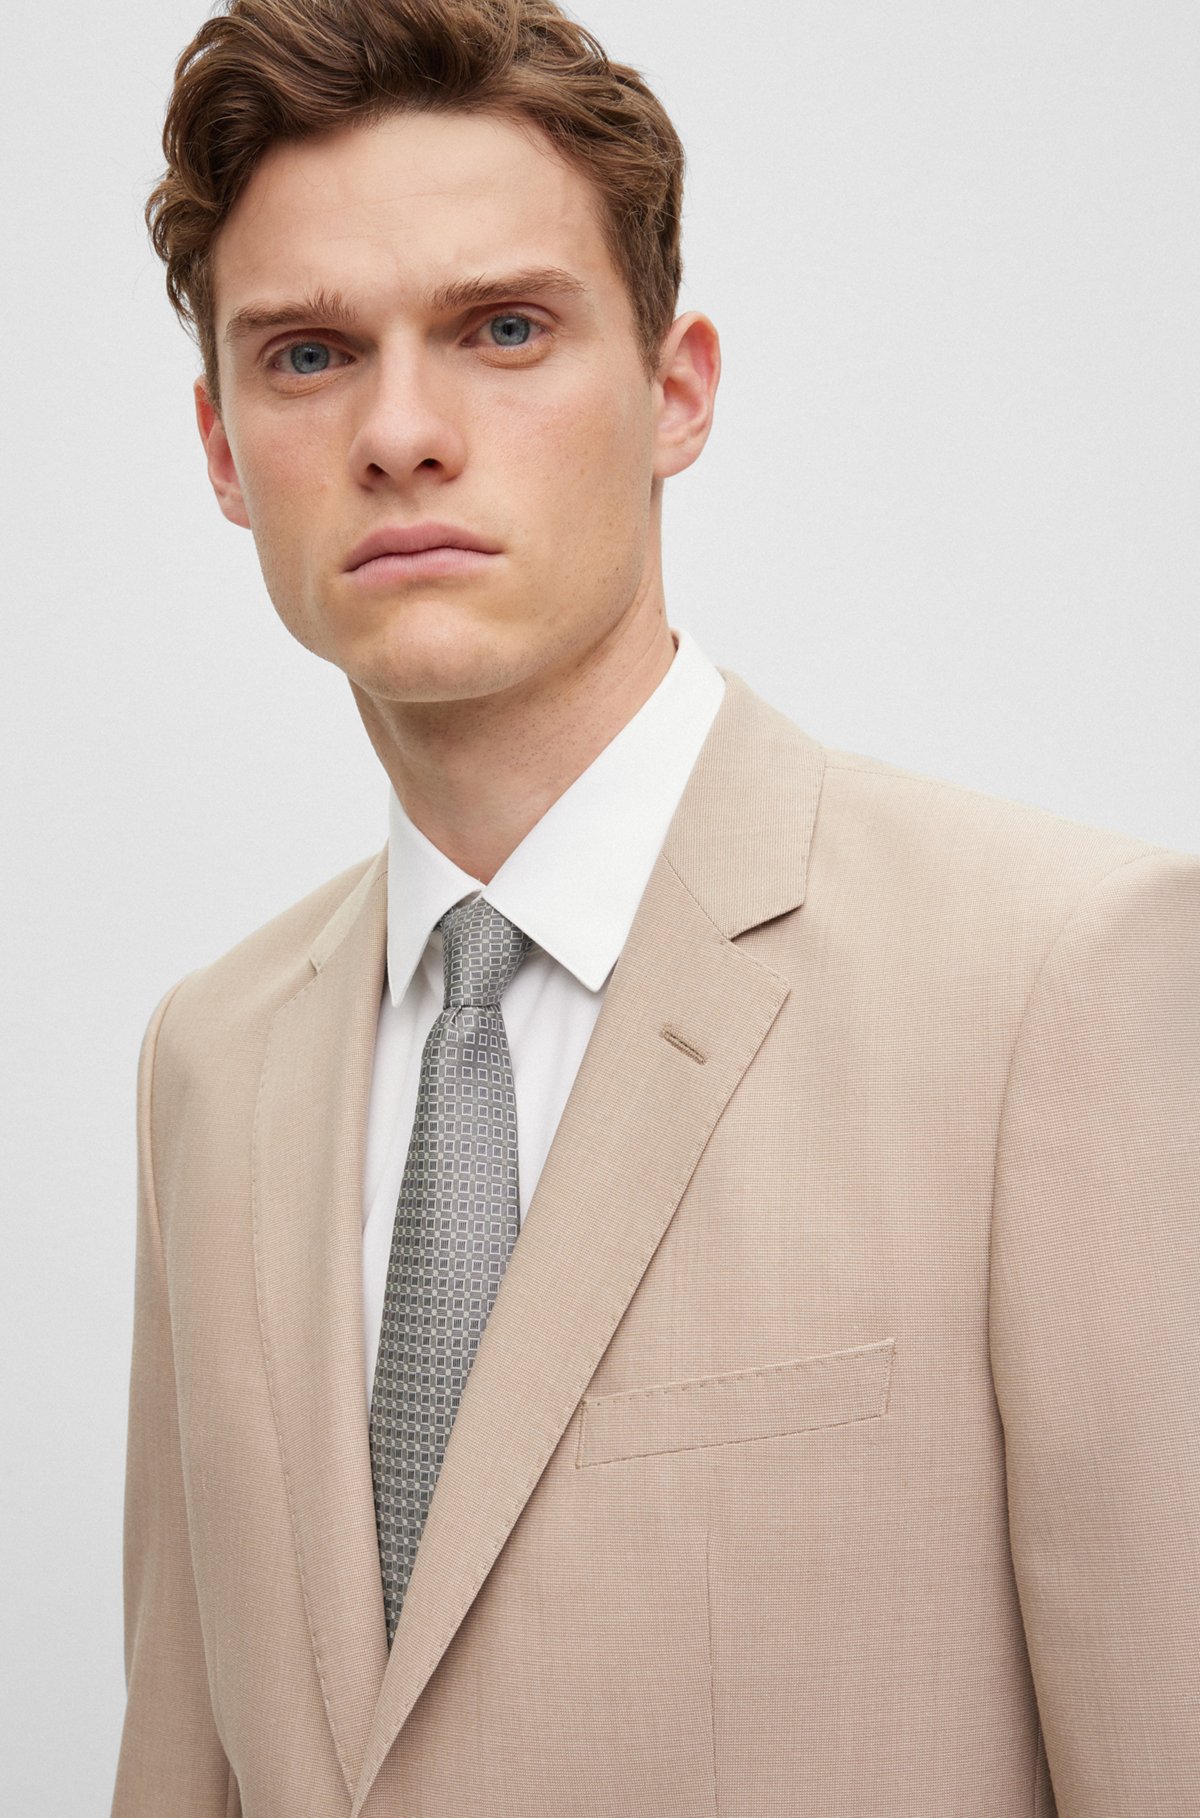 Regular-fit jacket in micro-patterned stretch cloth, Beige